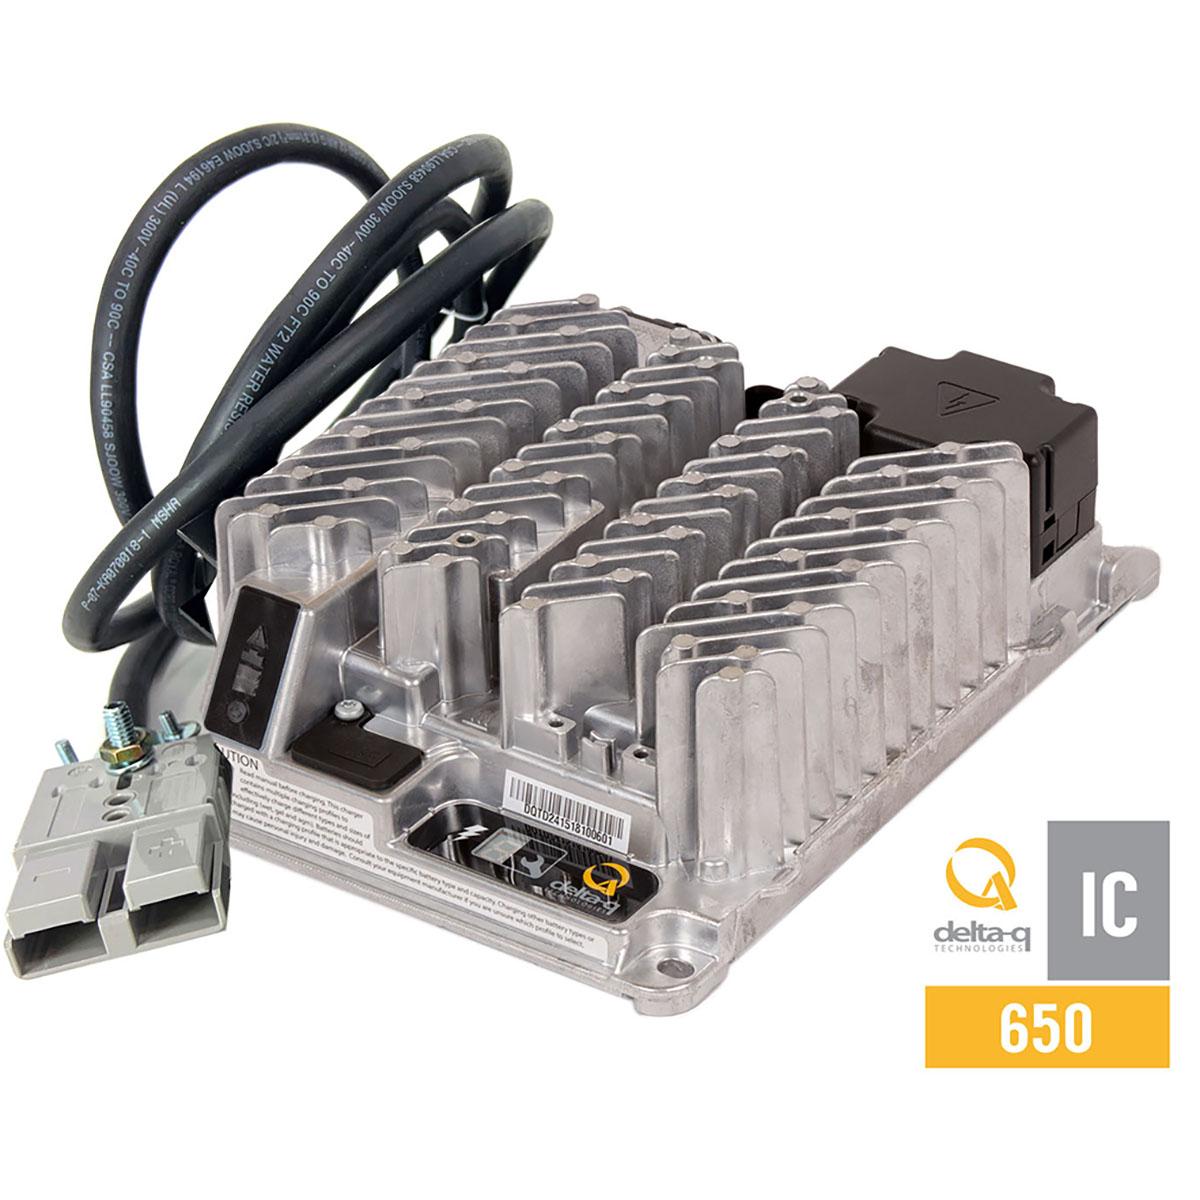 Delta-Q Ic650 Charger 36 Volt, 18 Amp, Includes 50 Amp Gray Dc Cord Ê_Delta-Q Ic Series Battery Charger User Manual